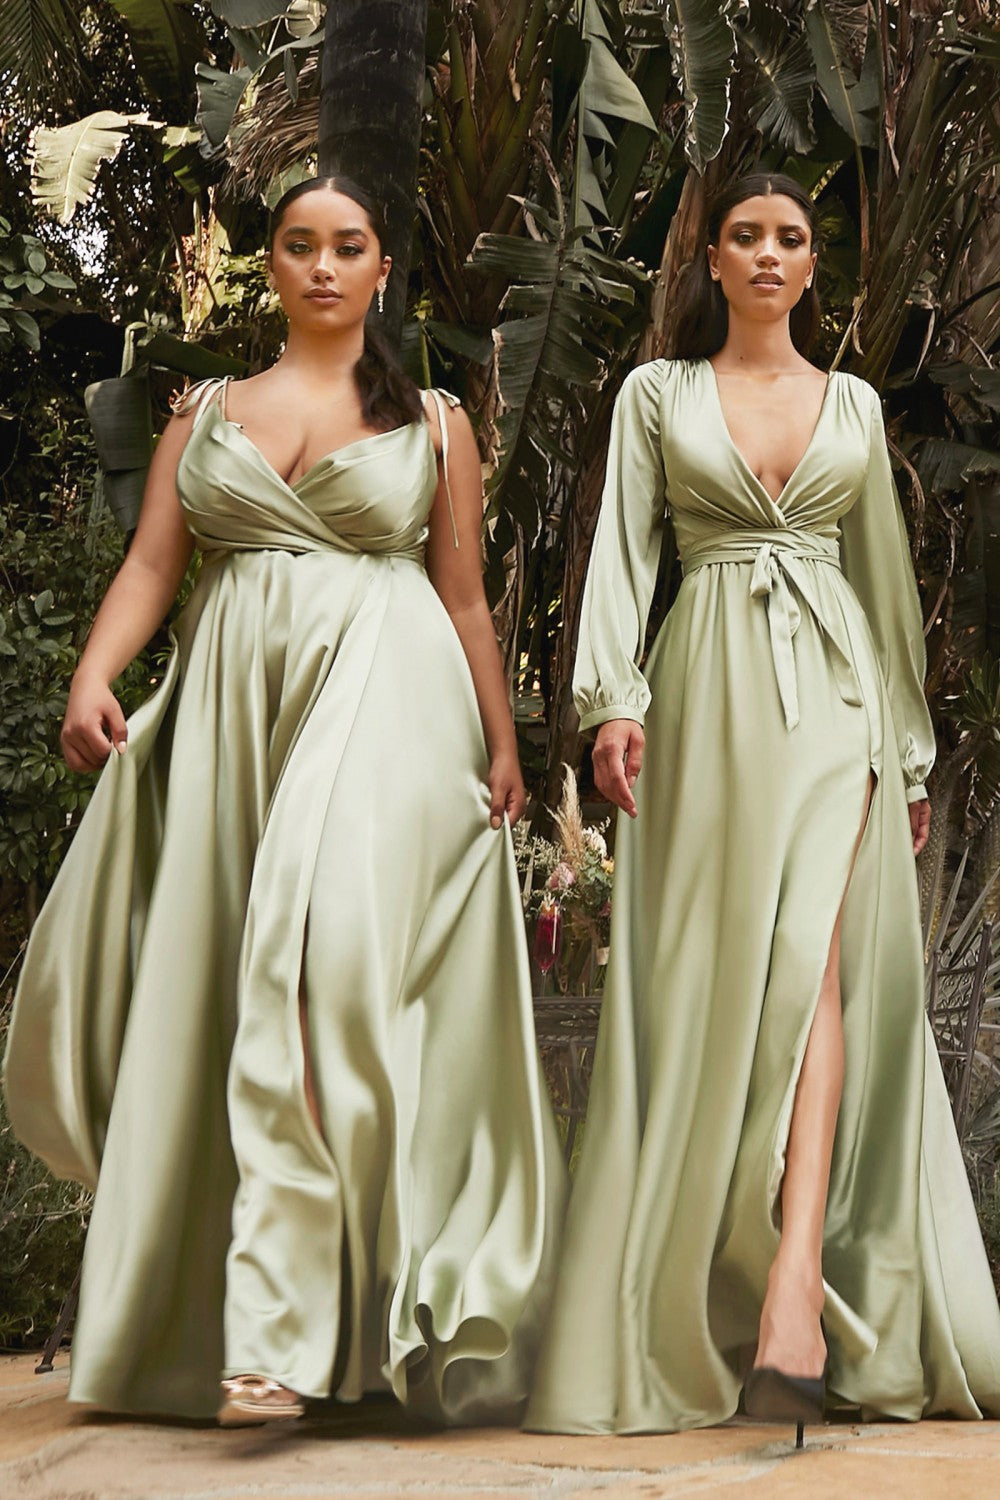 Flowy Satin Prom Gown A-Line Skirt with High Leg Slit Fitted on Waist Bodice Vintage Neckline with Tied Straps CDBD105 Elsy Style Bridesmaid